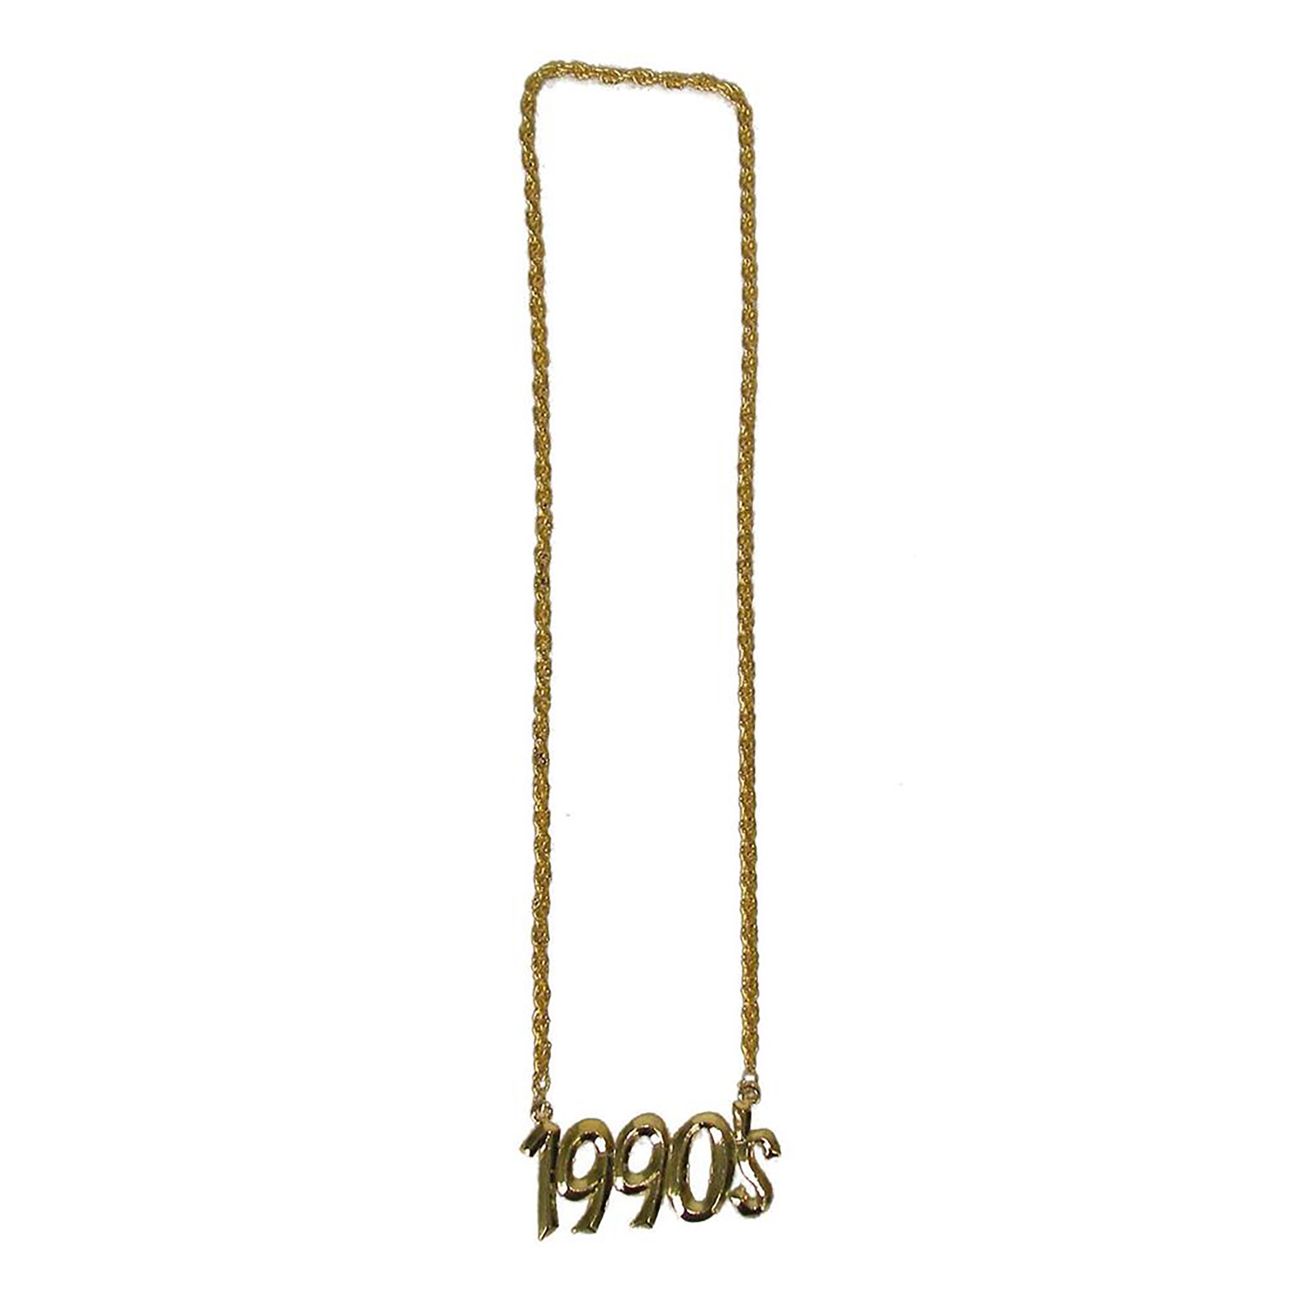 necklace-1990-87721-1